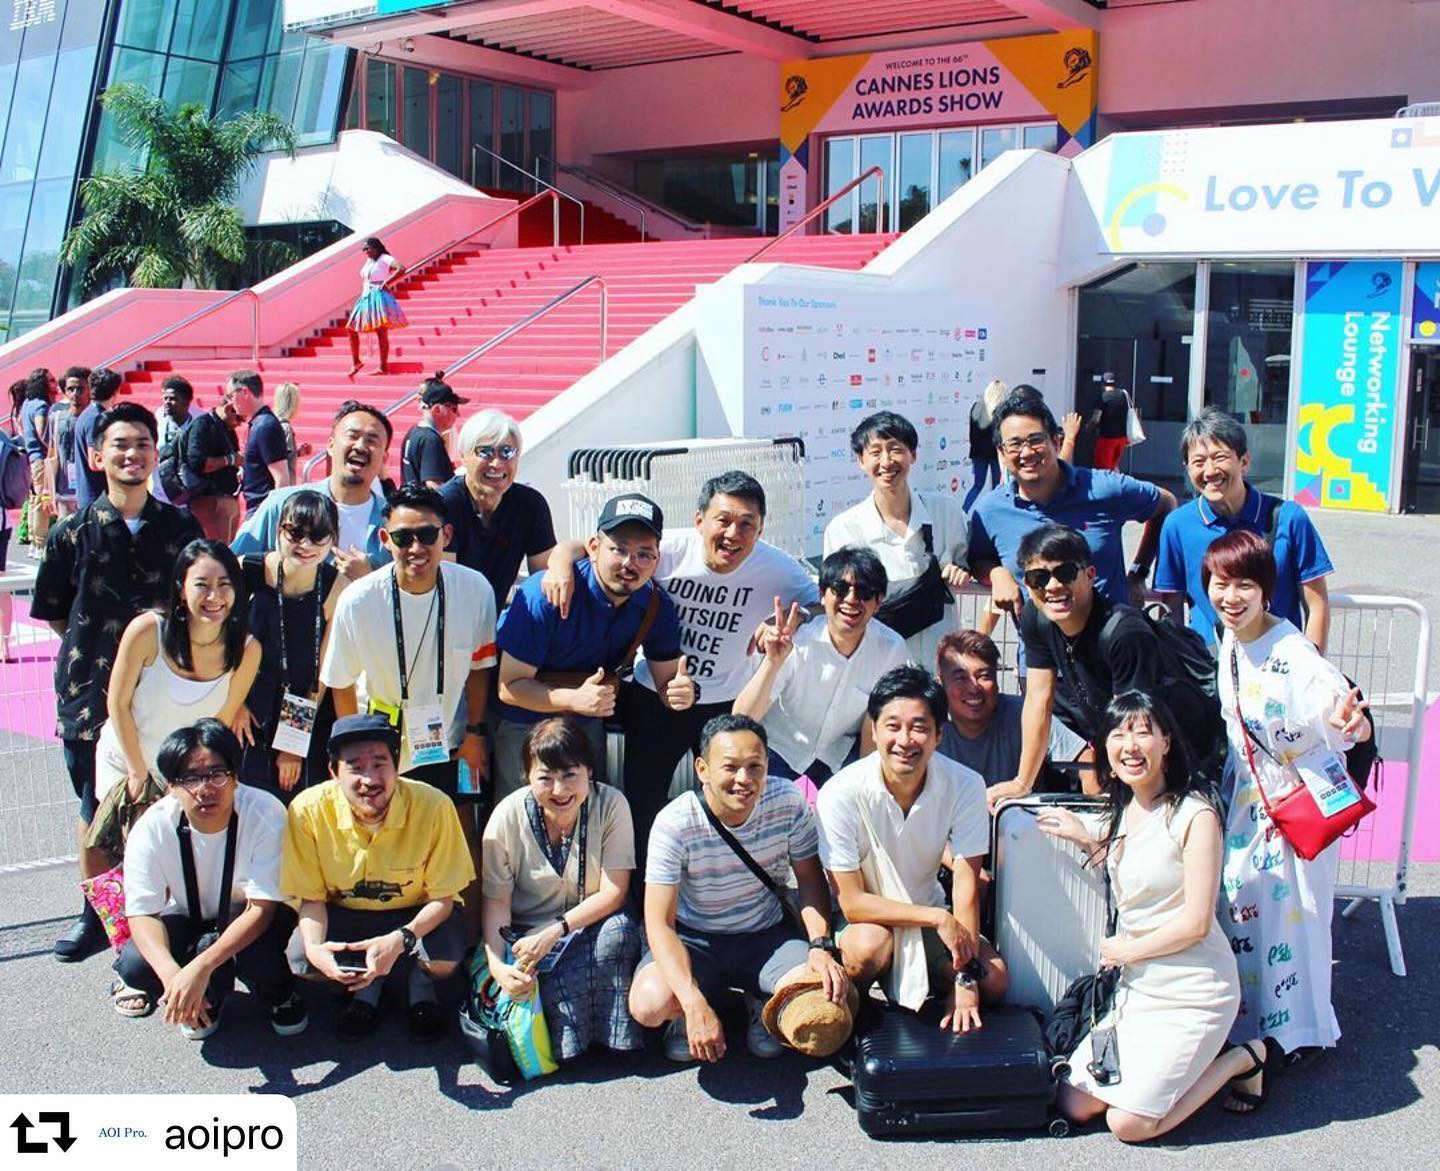 _﻿
﻿AOI Pro. Team in Cannes!!﻿
﻿
repost: @aoipro ﻿

#AOICannes  #canneslions2019  #cannes  #france  #festival  #award  #groupphoto  #red 